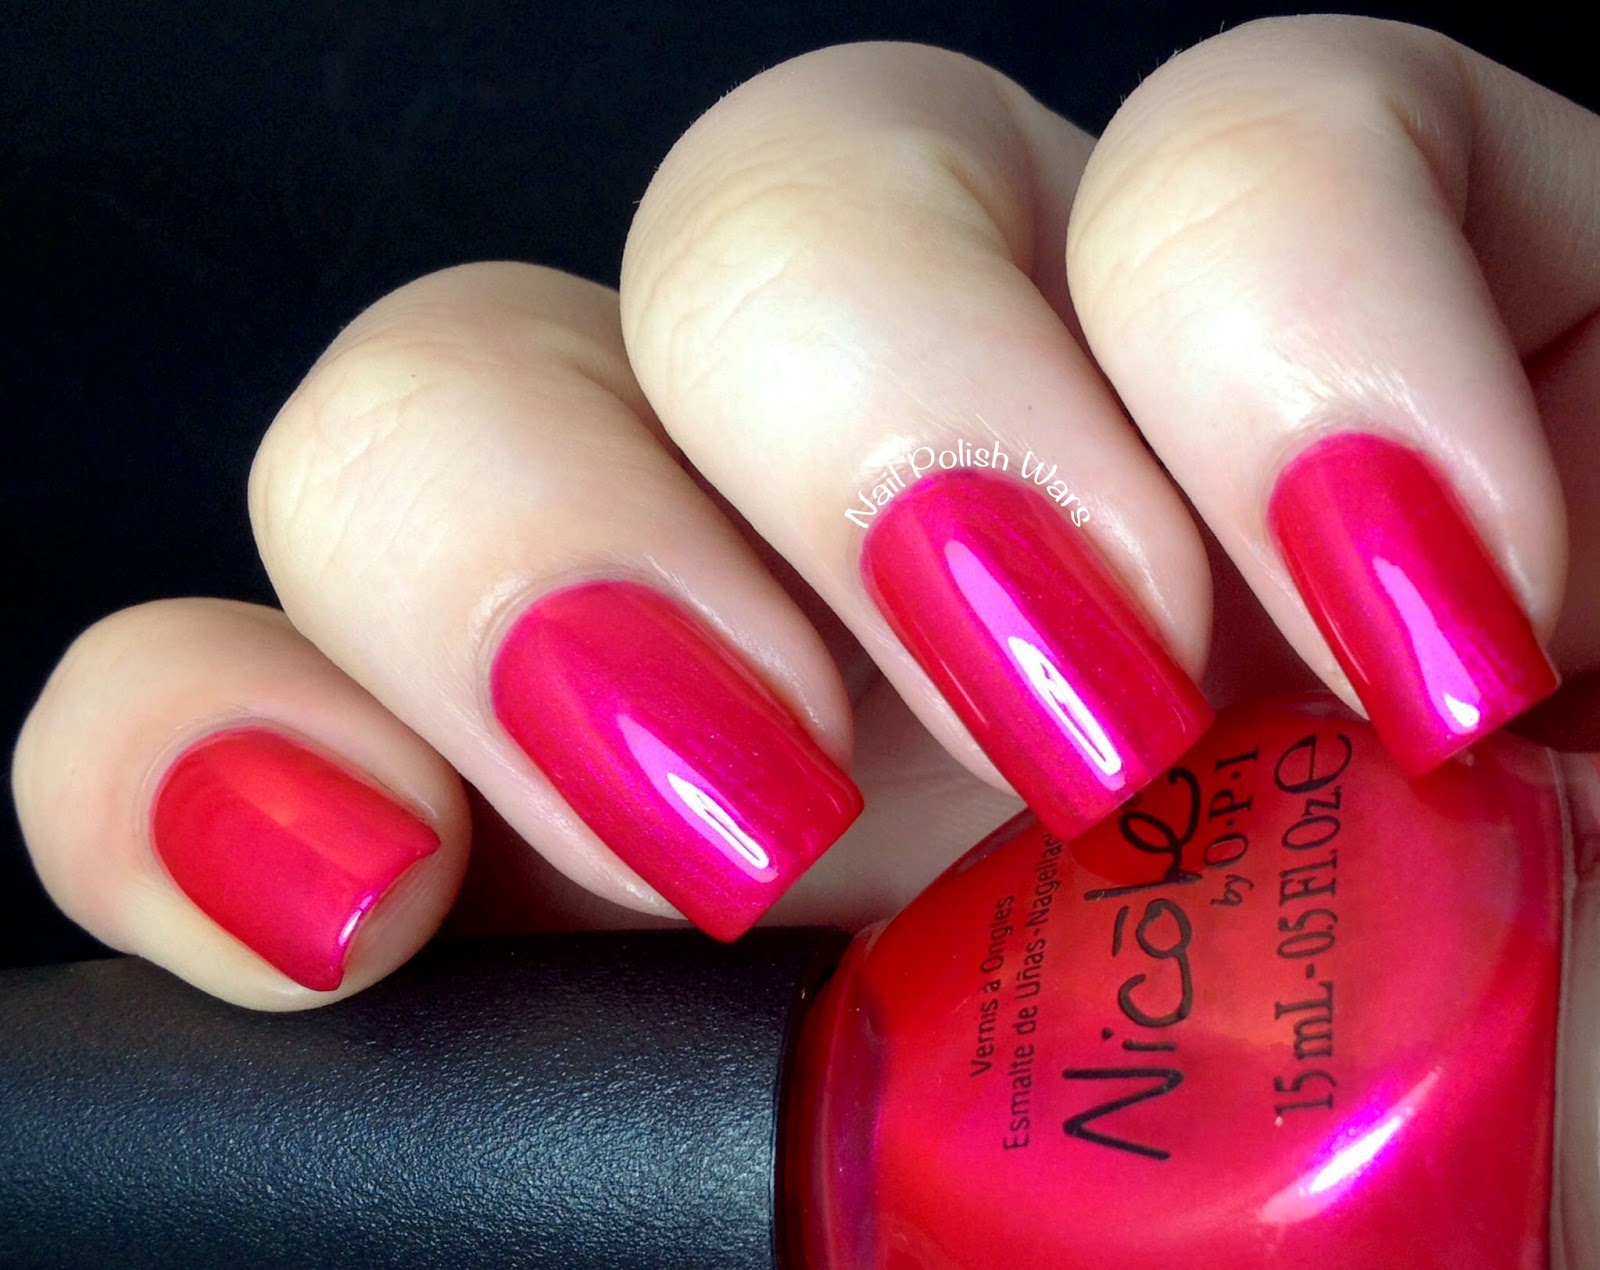 1. Nicole by OPI Nail Polish - Color Change - wide 4